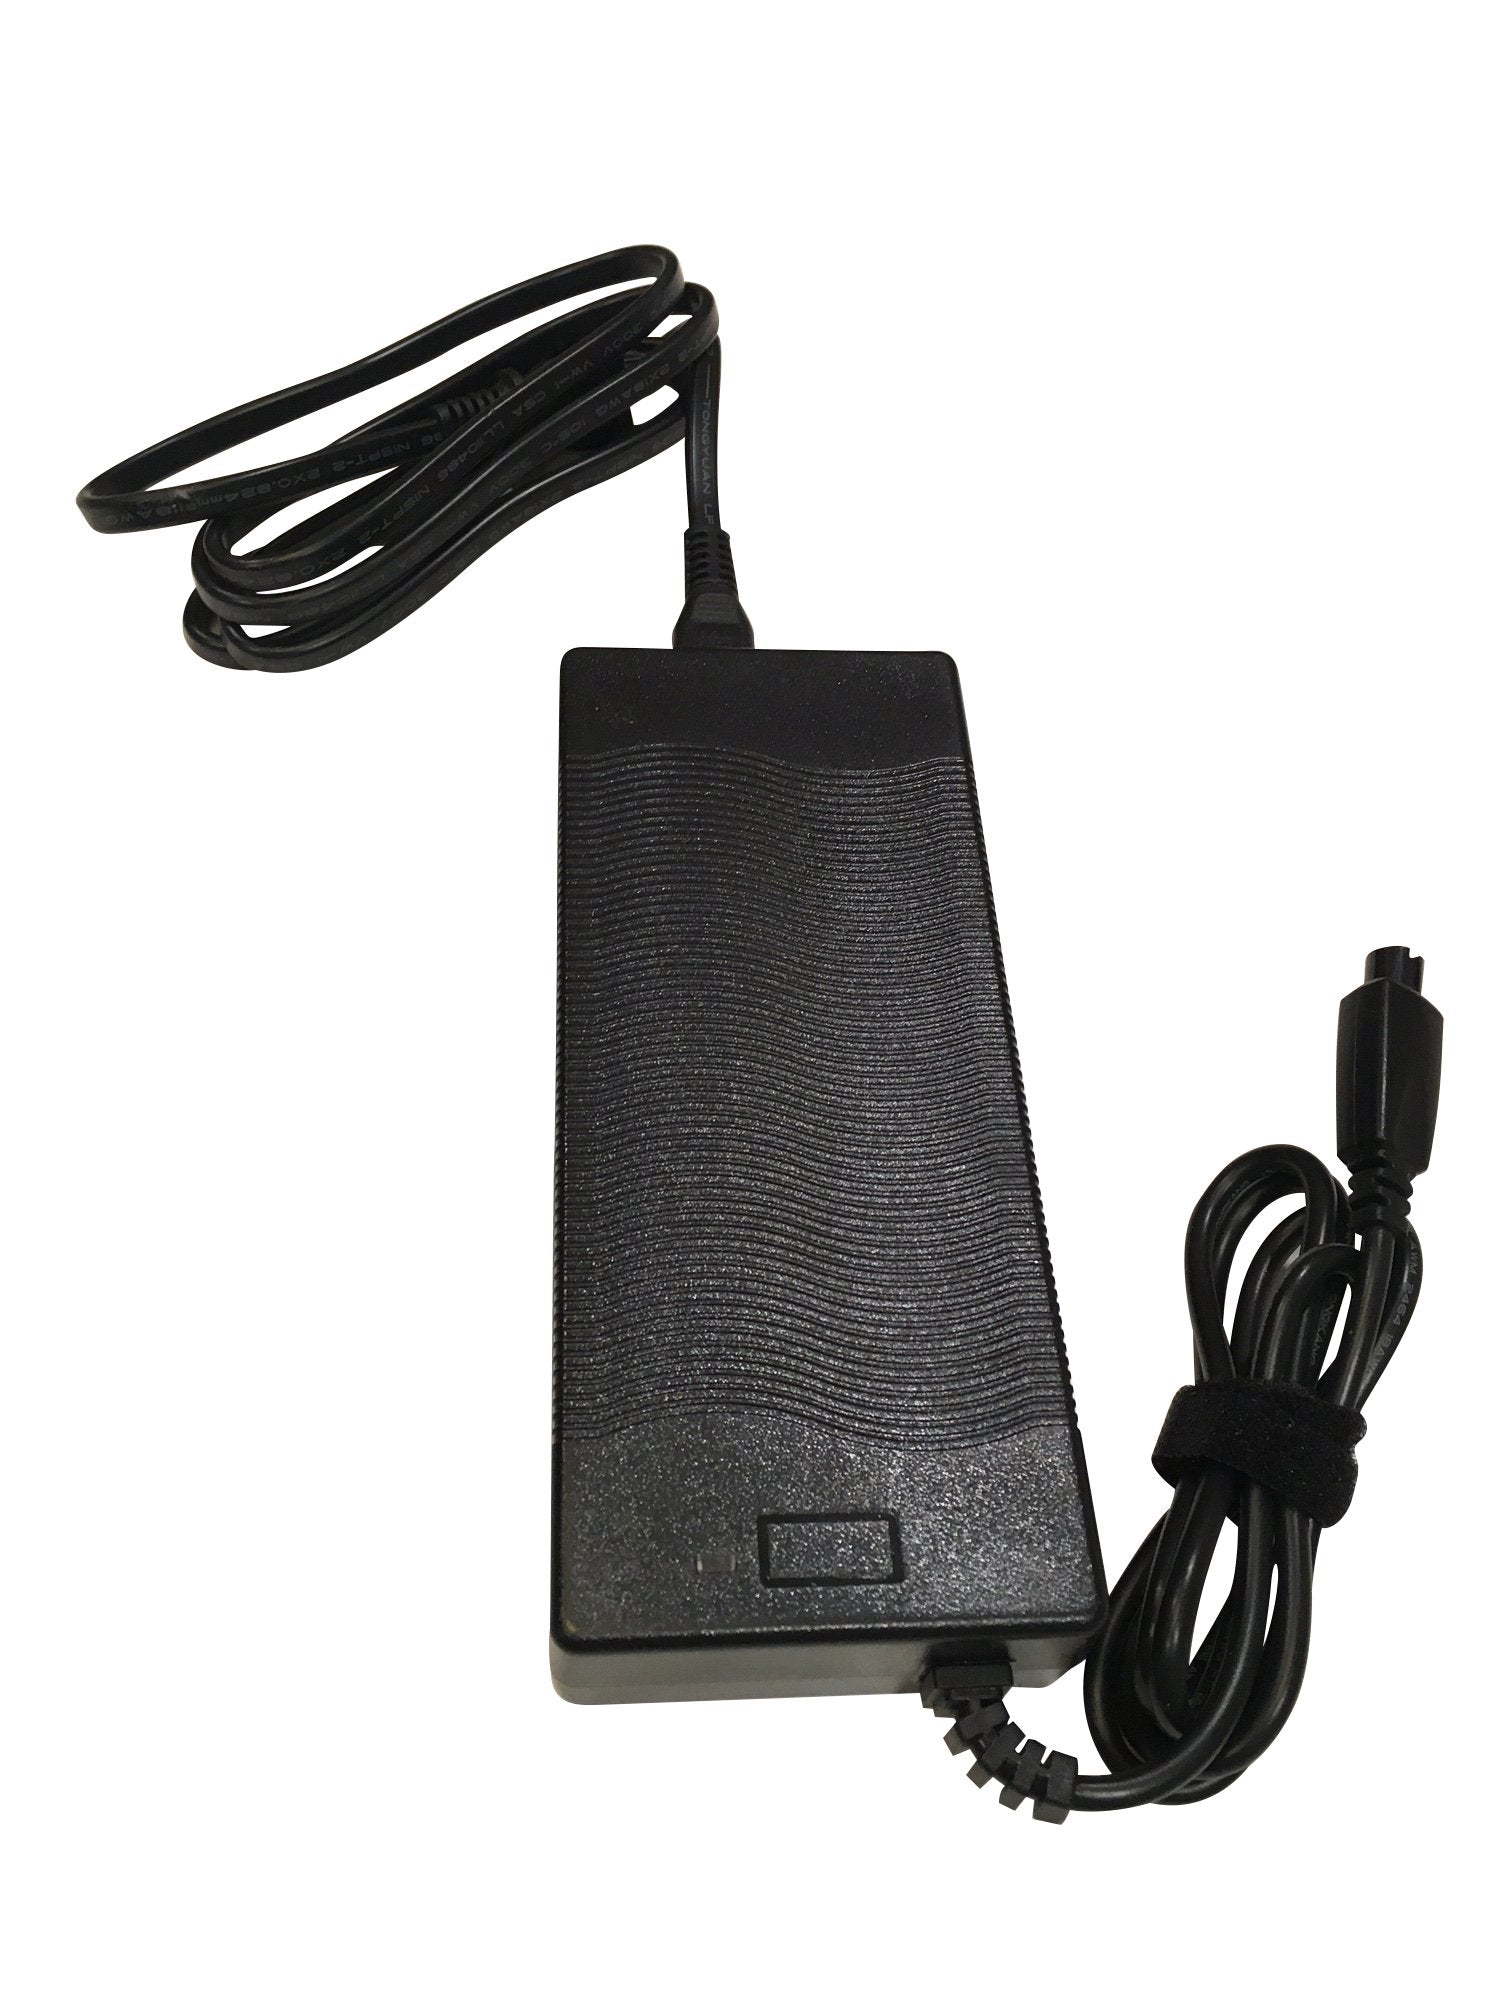 Power Charger for Segway miniPRO - M4M-Europe